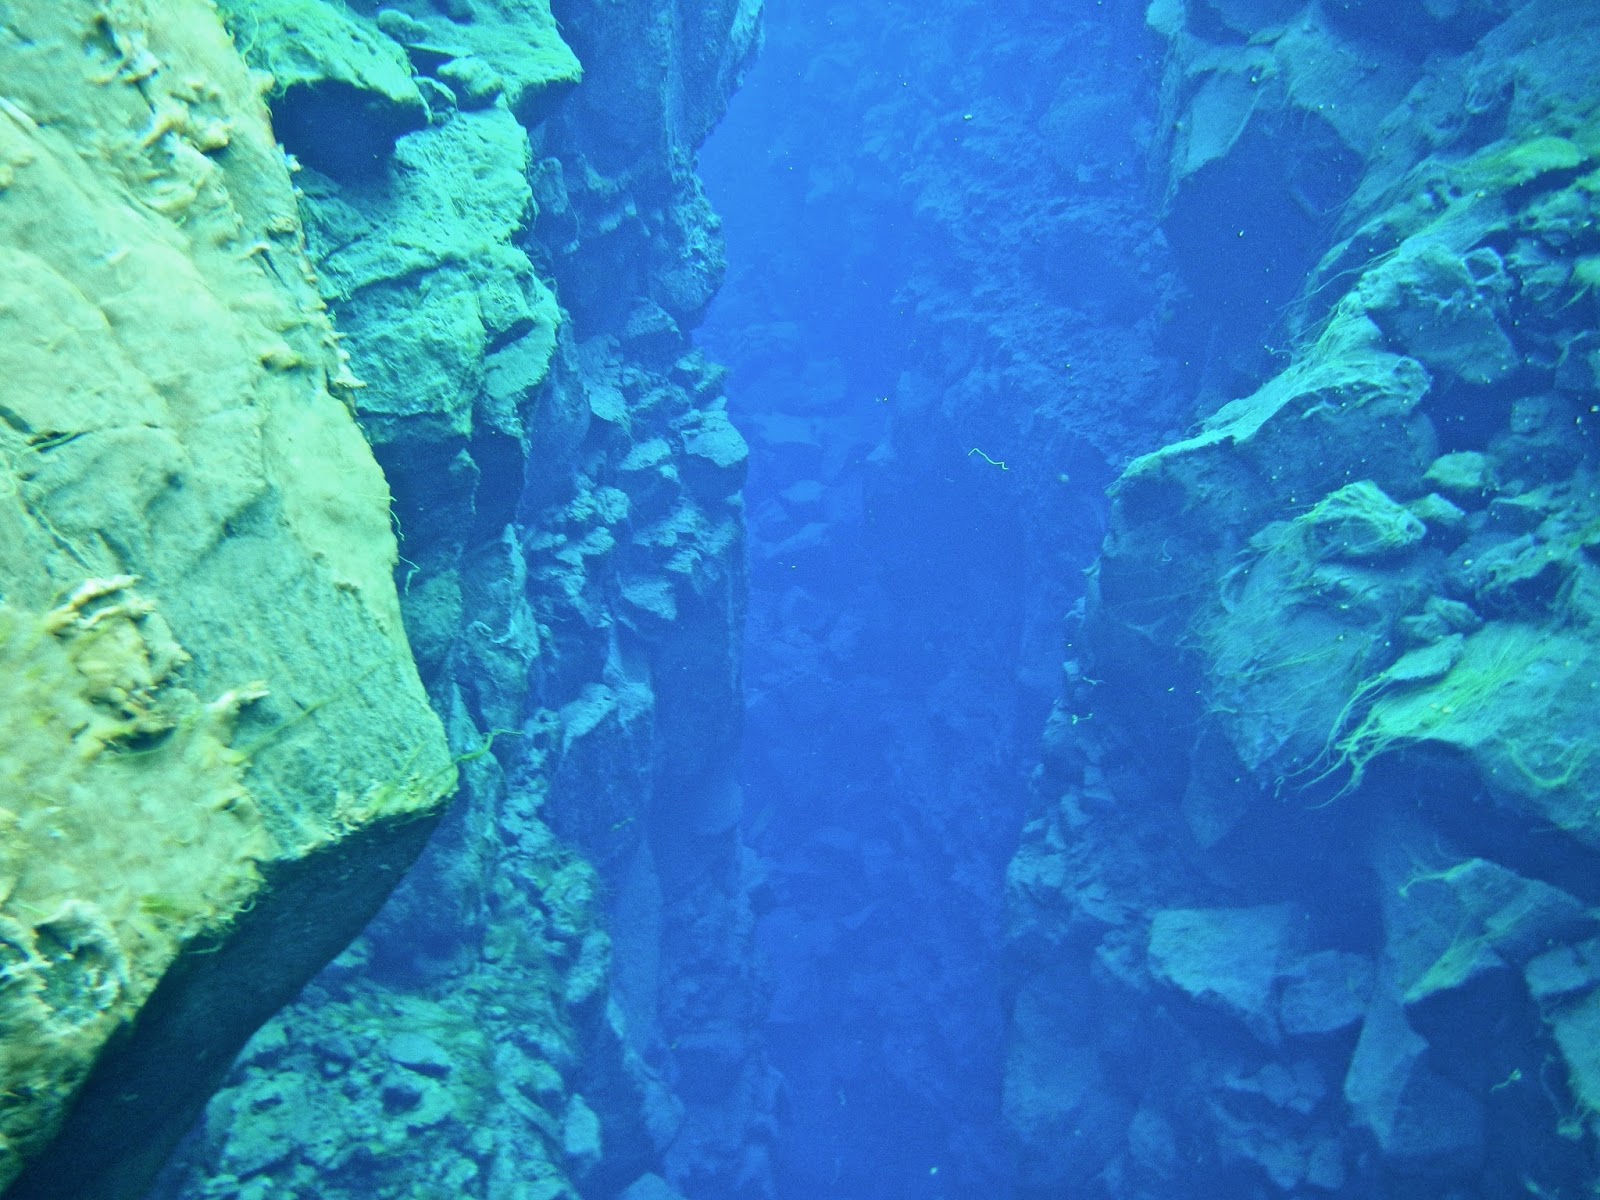 Things to do in Reykjavik Iceland : Snorkel between the Eurasian and American tectonic plates in the Silfra Fissure